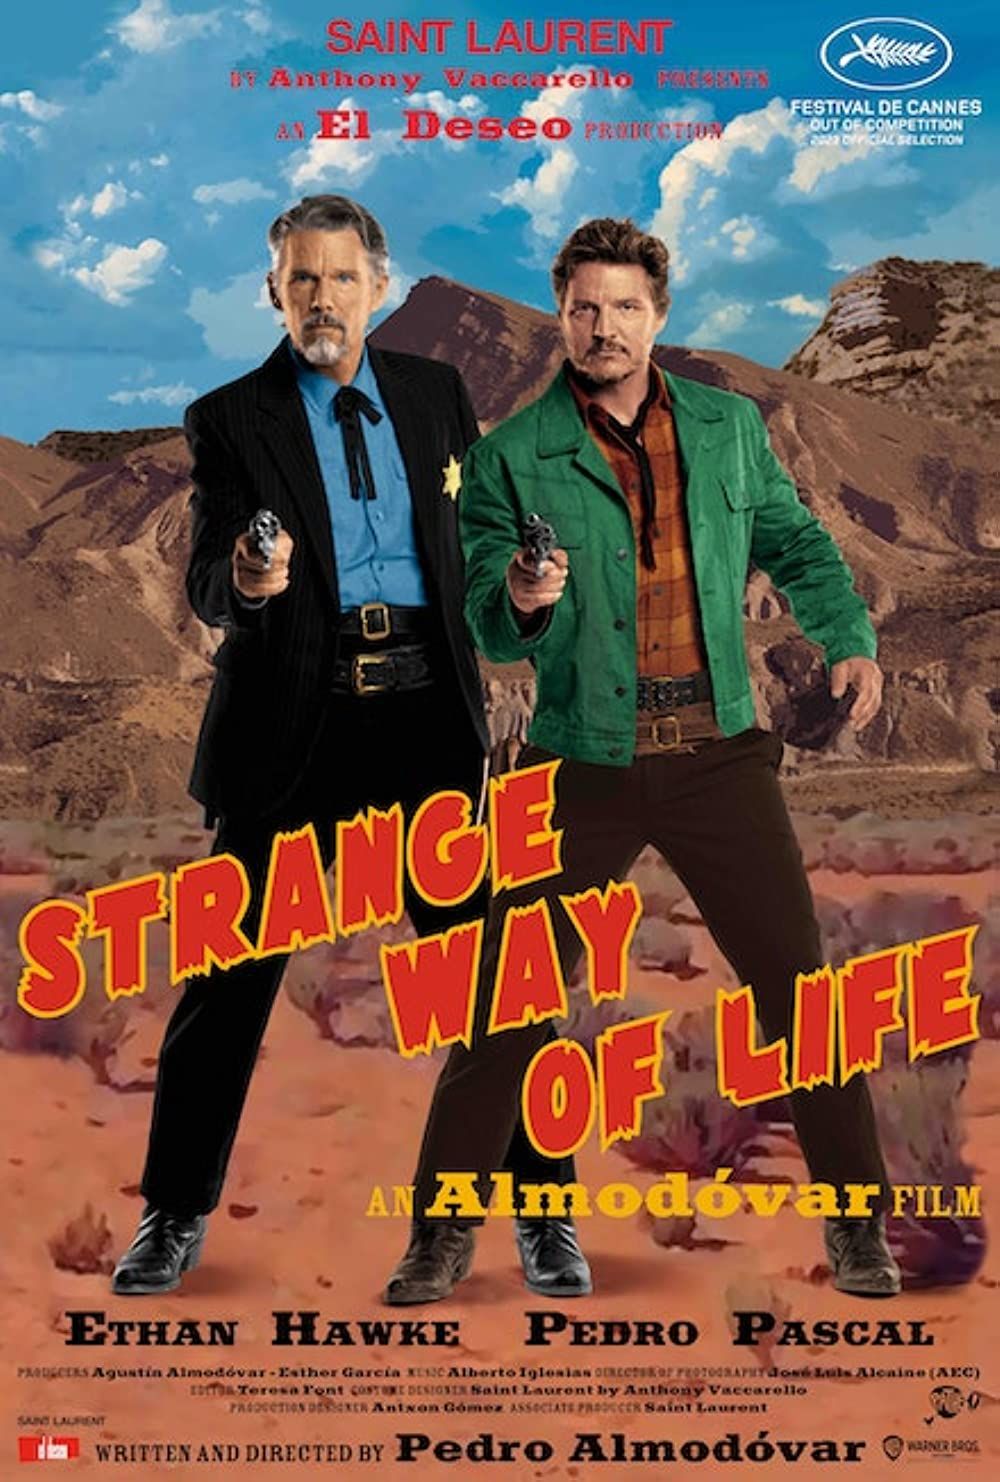 Pedro Pascal and Ethan Hawke star